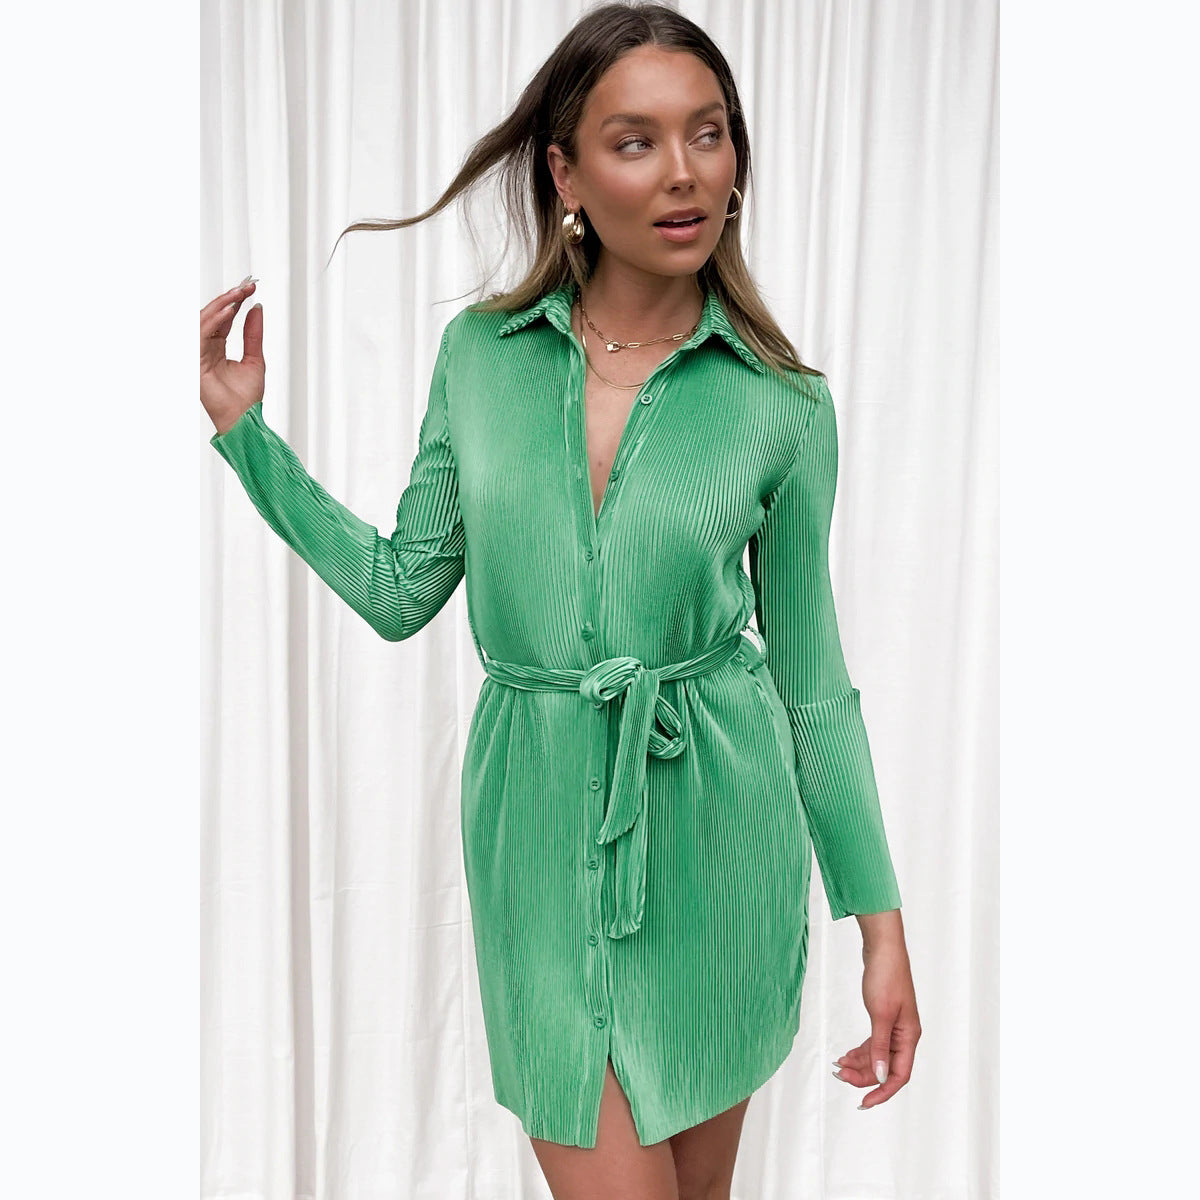 Spring Summer Solid Color Pleated Single Breasted Shirt Dress